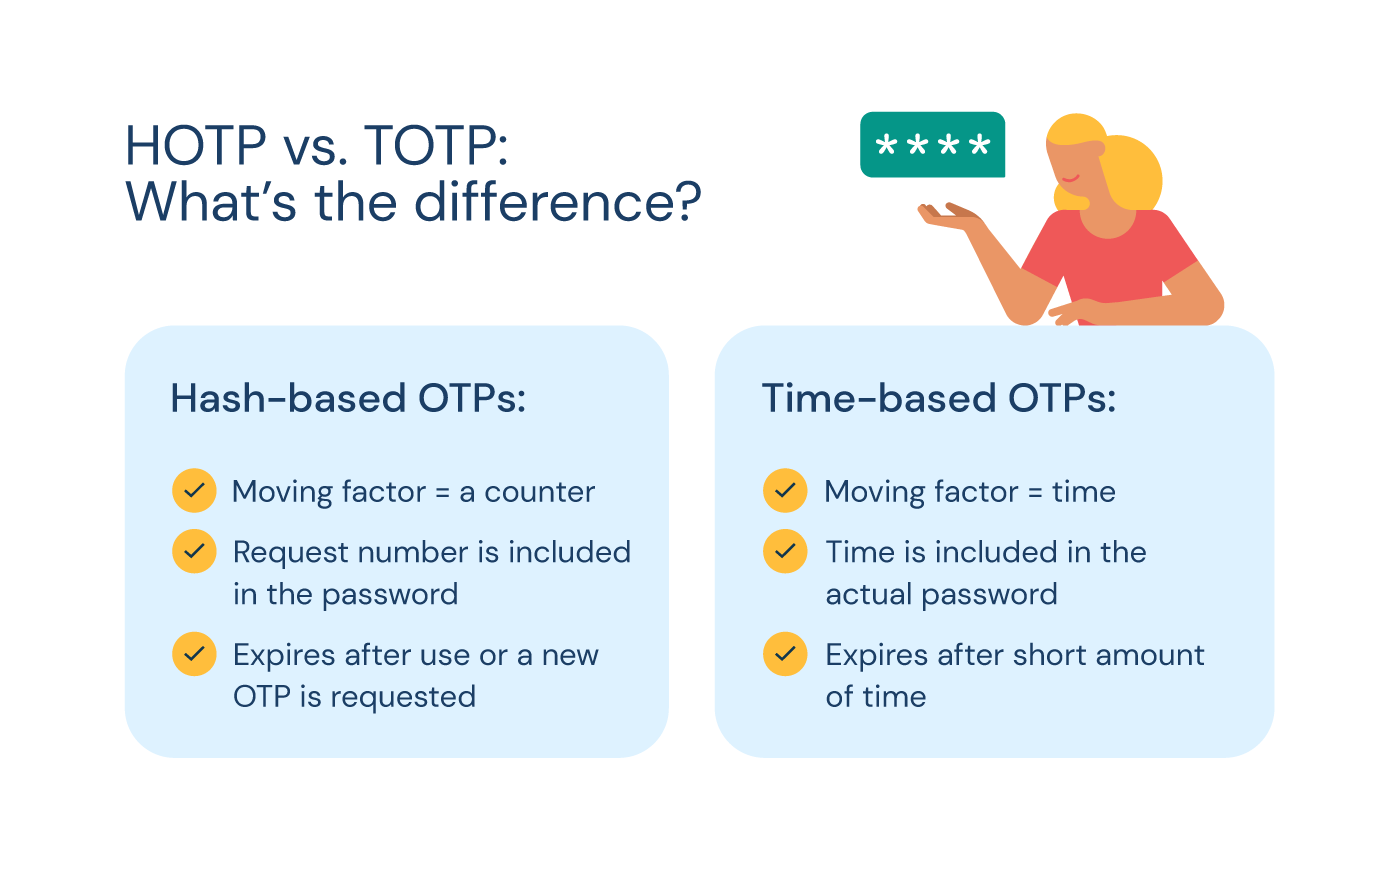 Illustration details the key differences between HOTP and TOTP